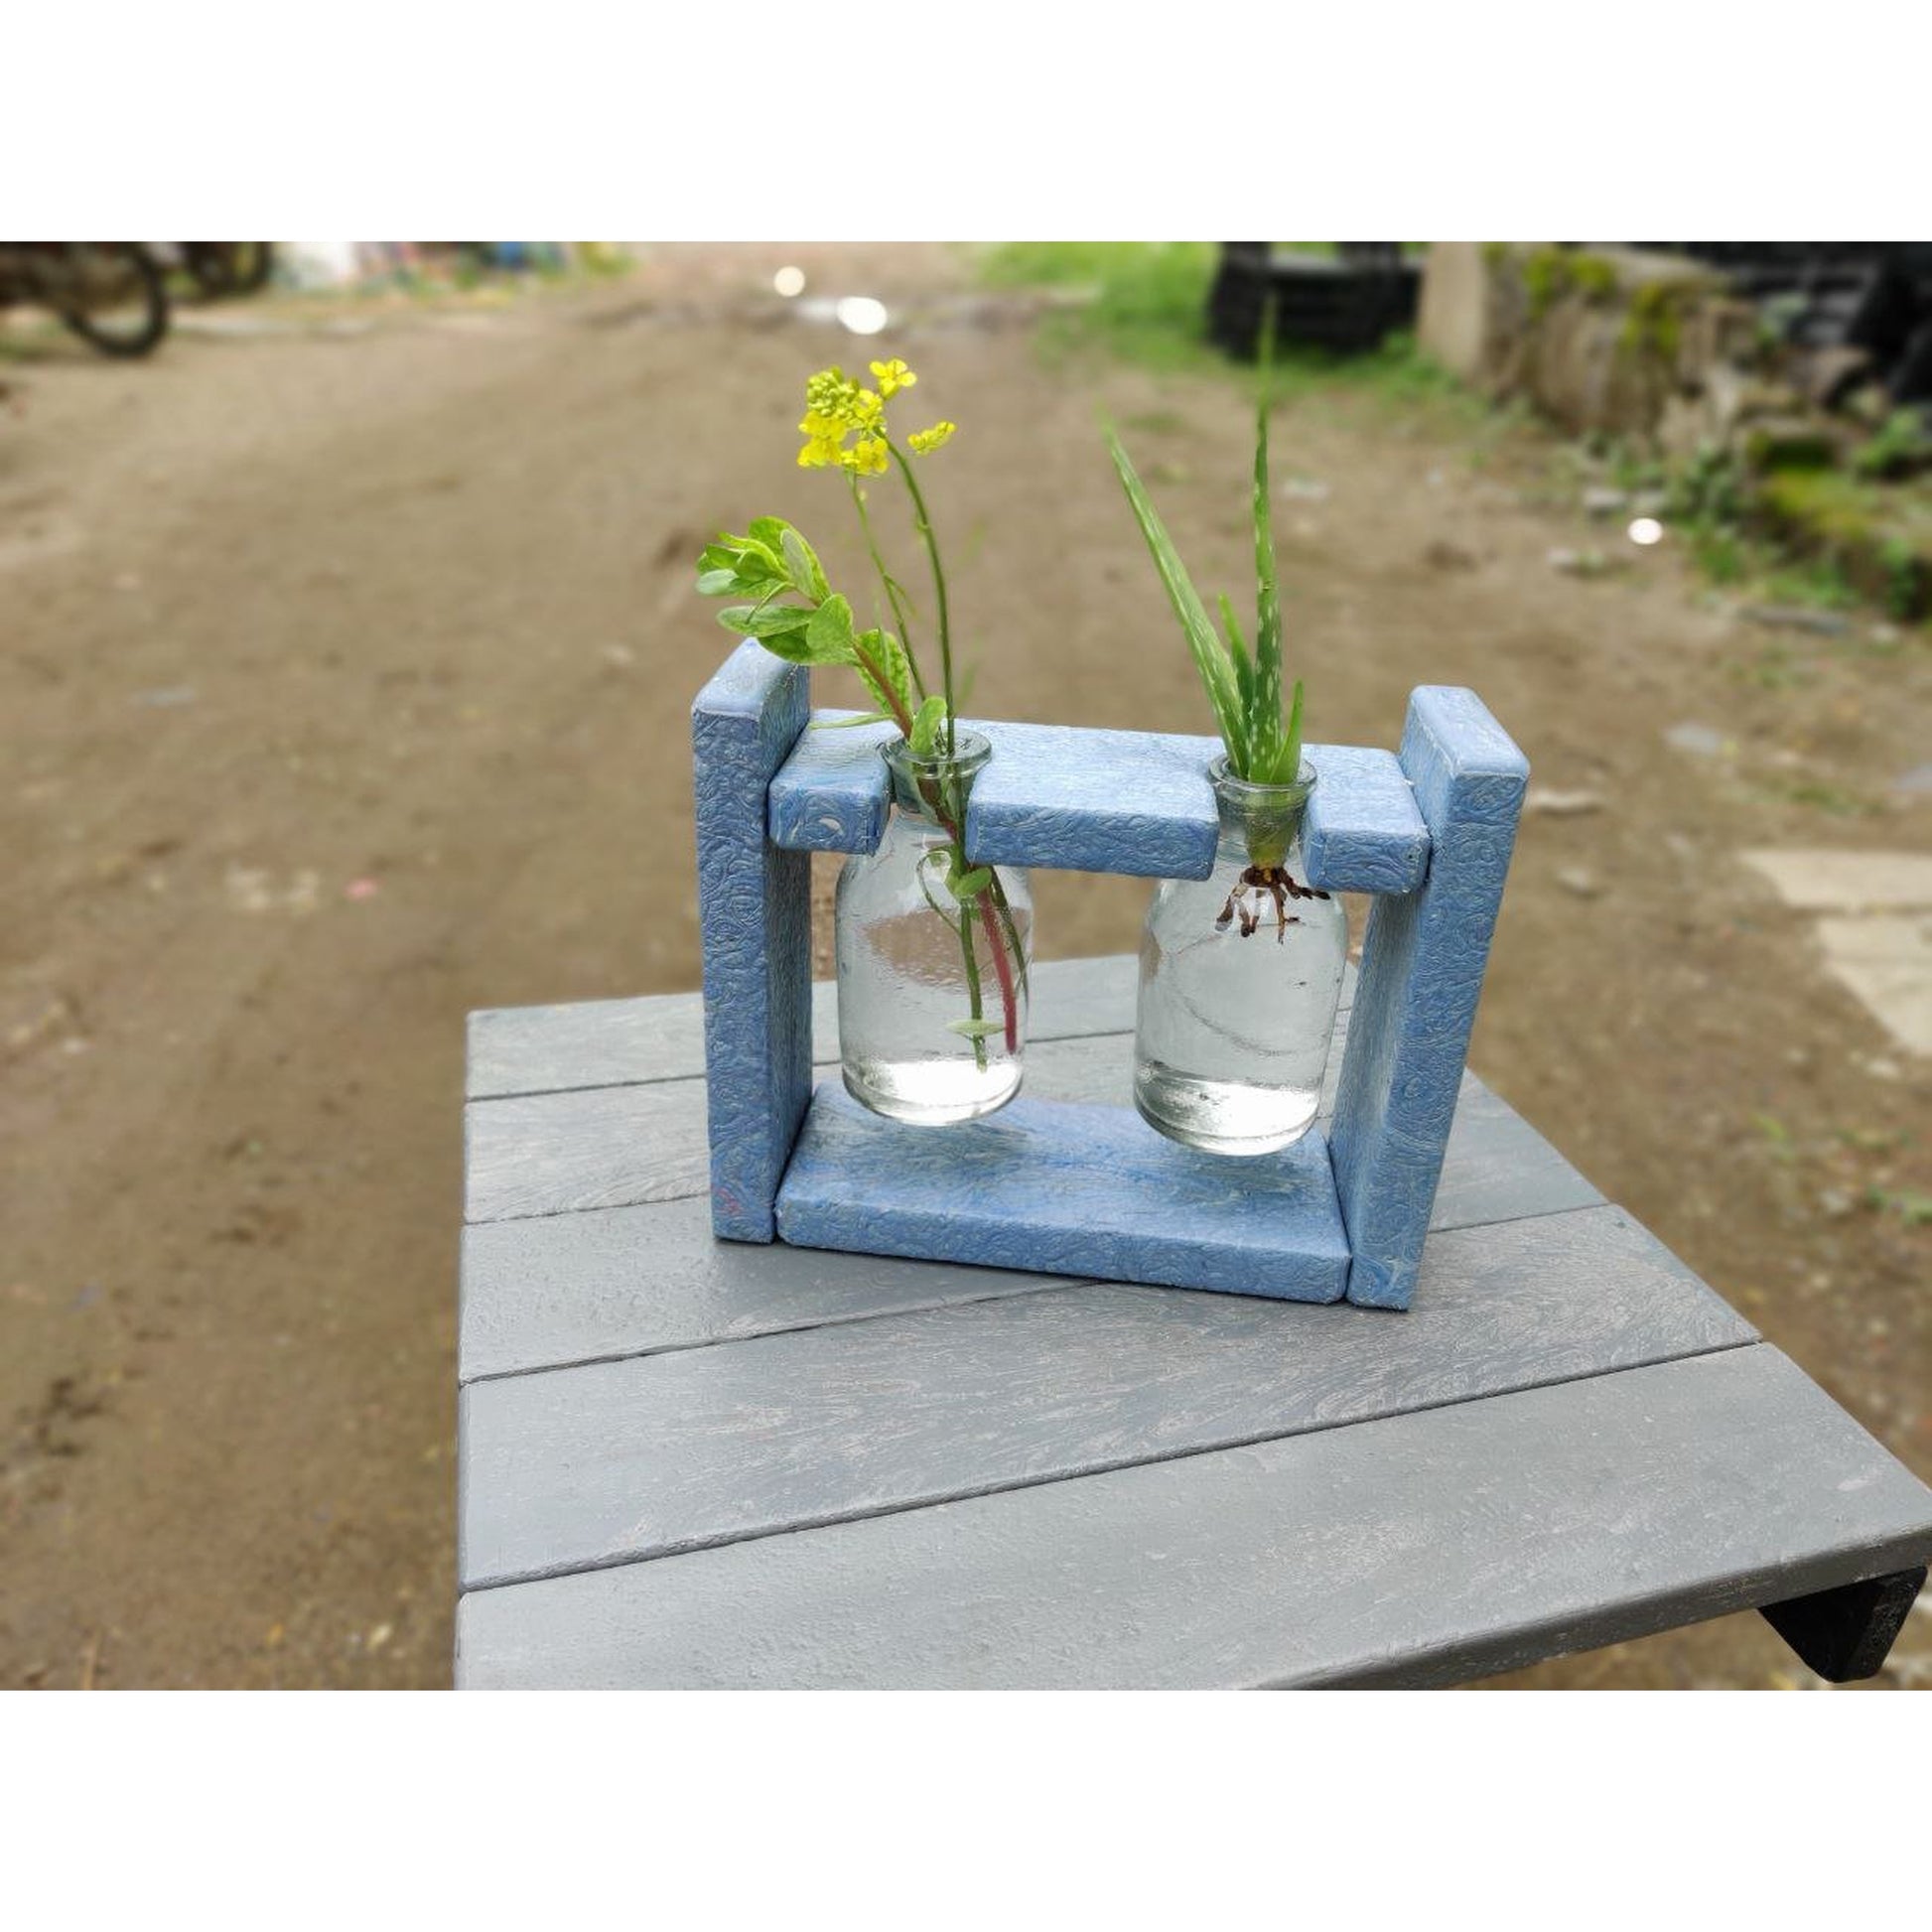 Econiture Bottle Planter Stand - The Teal Thread